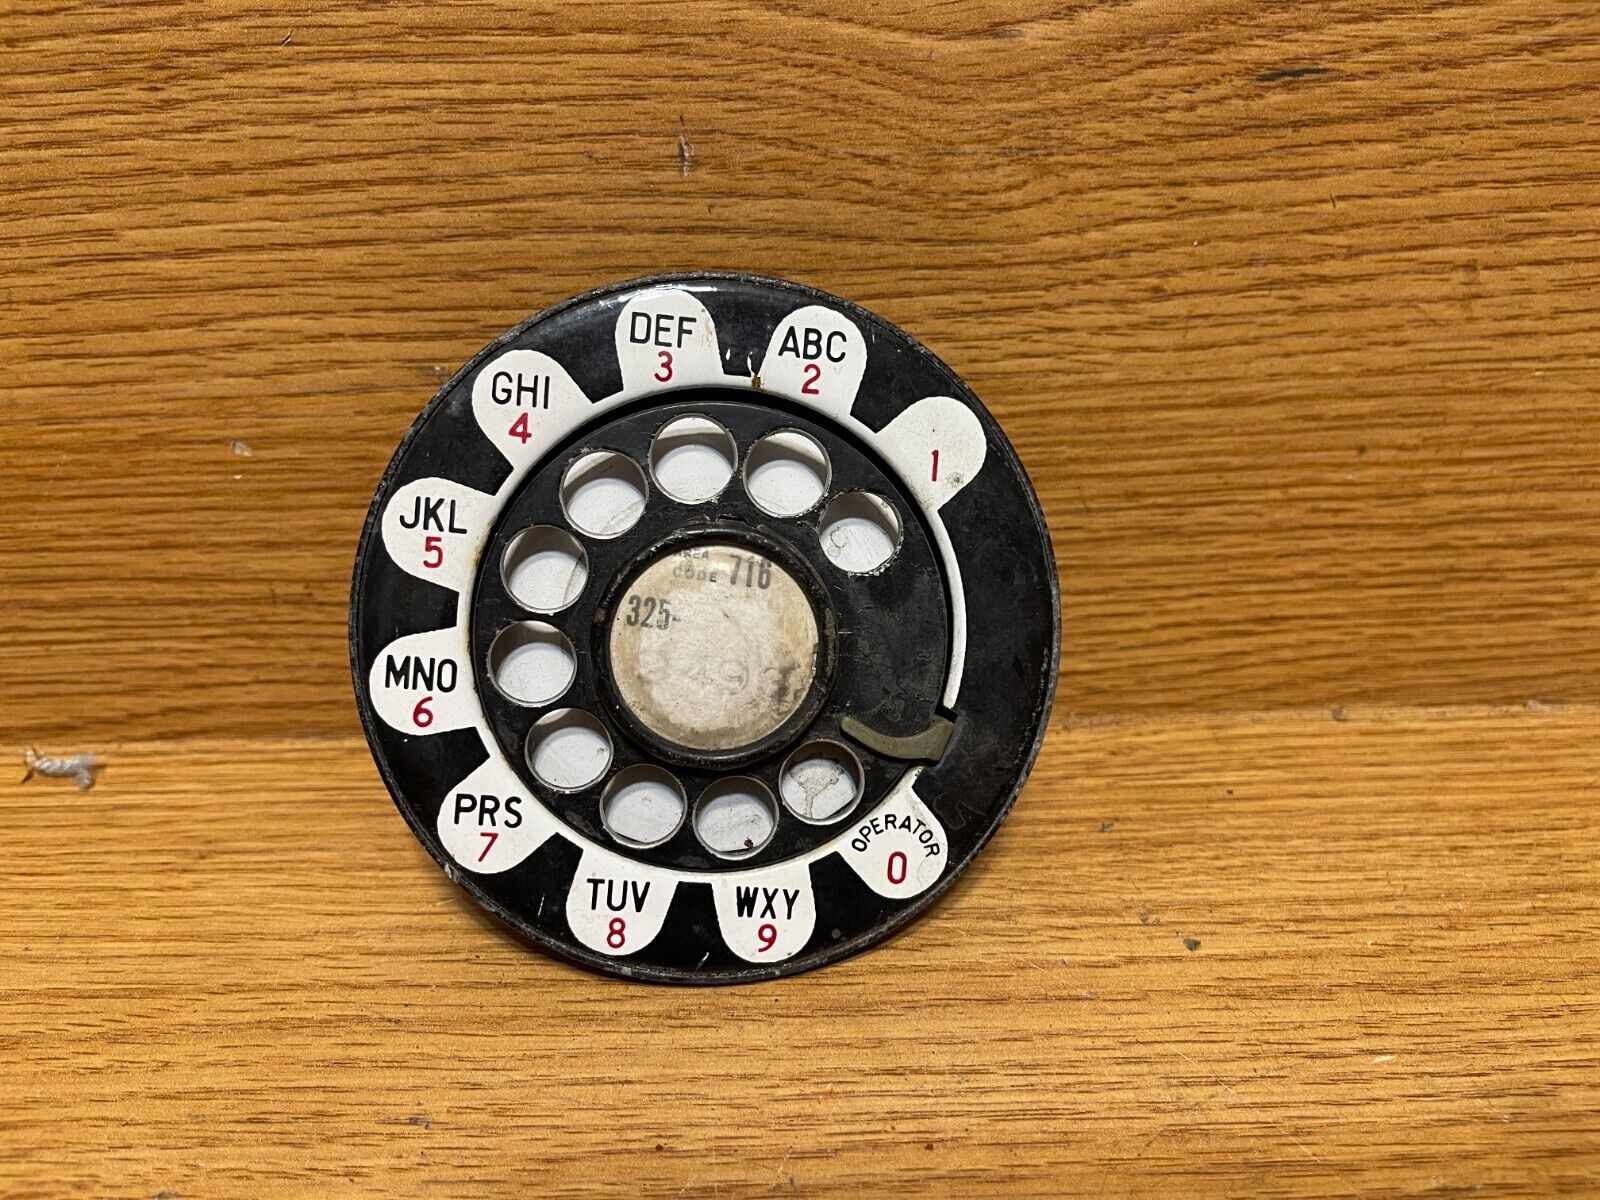 Western Electric Payphone Daisy Dial